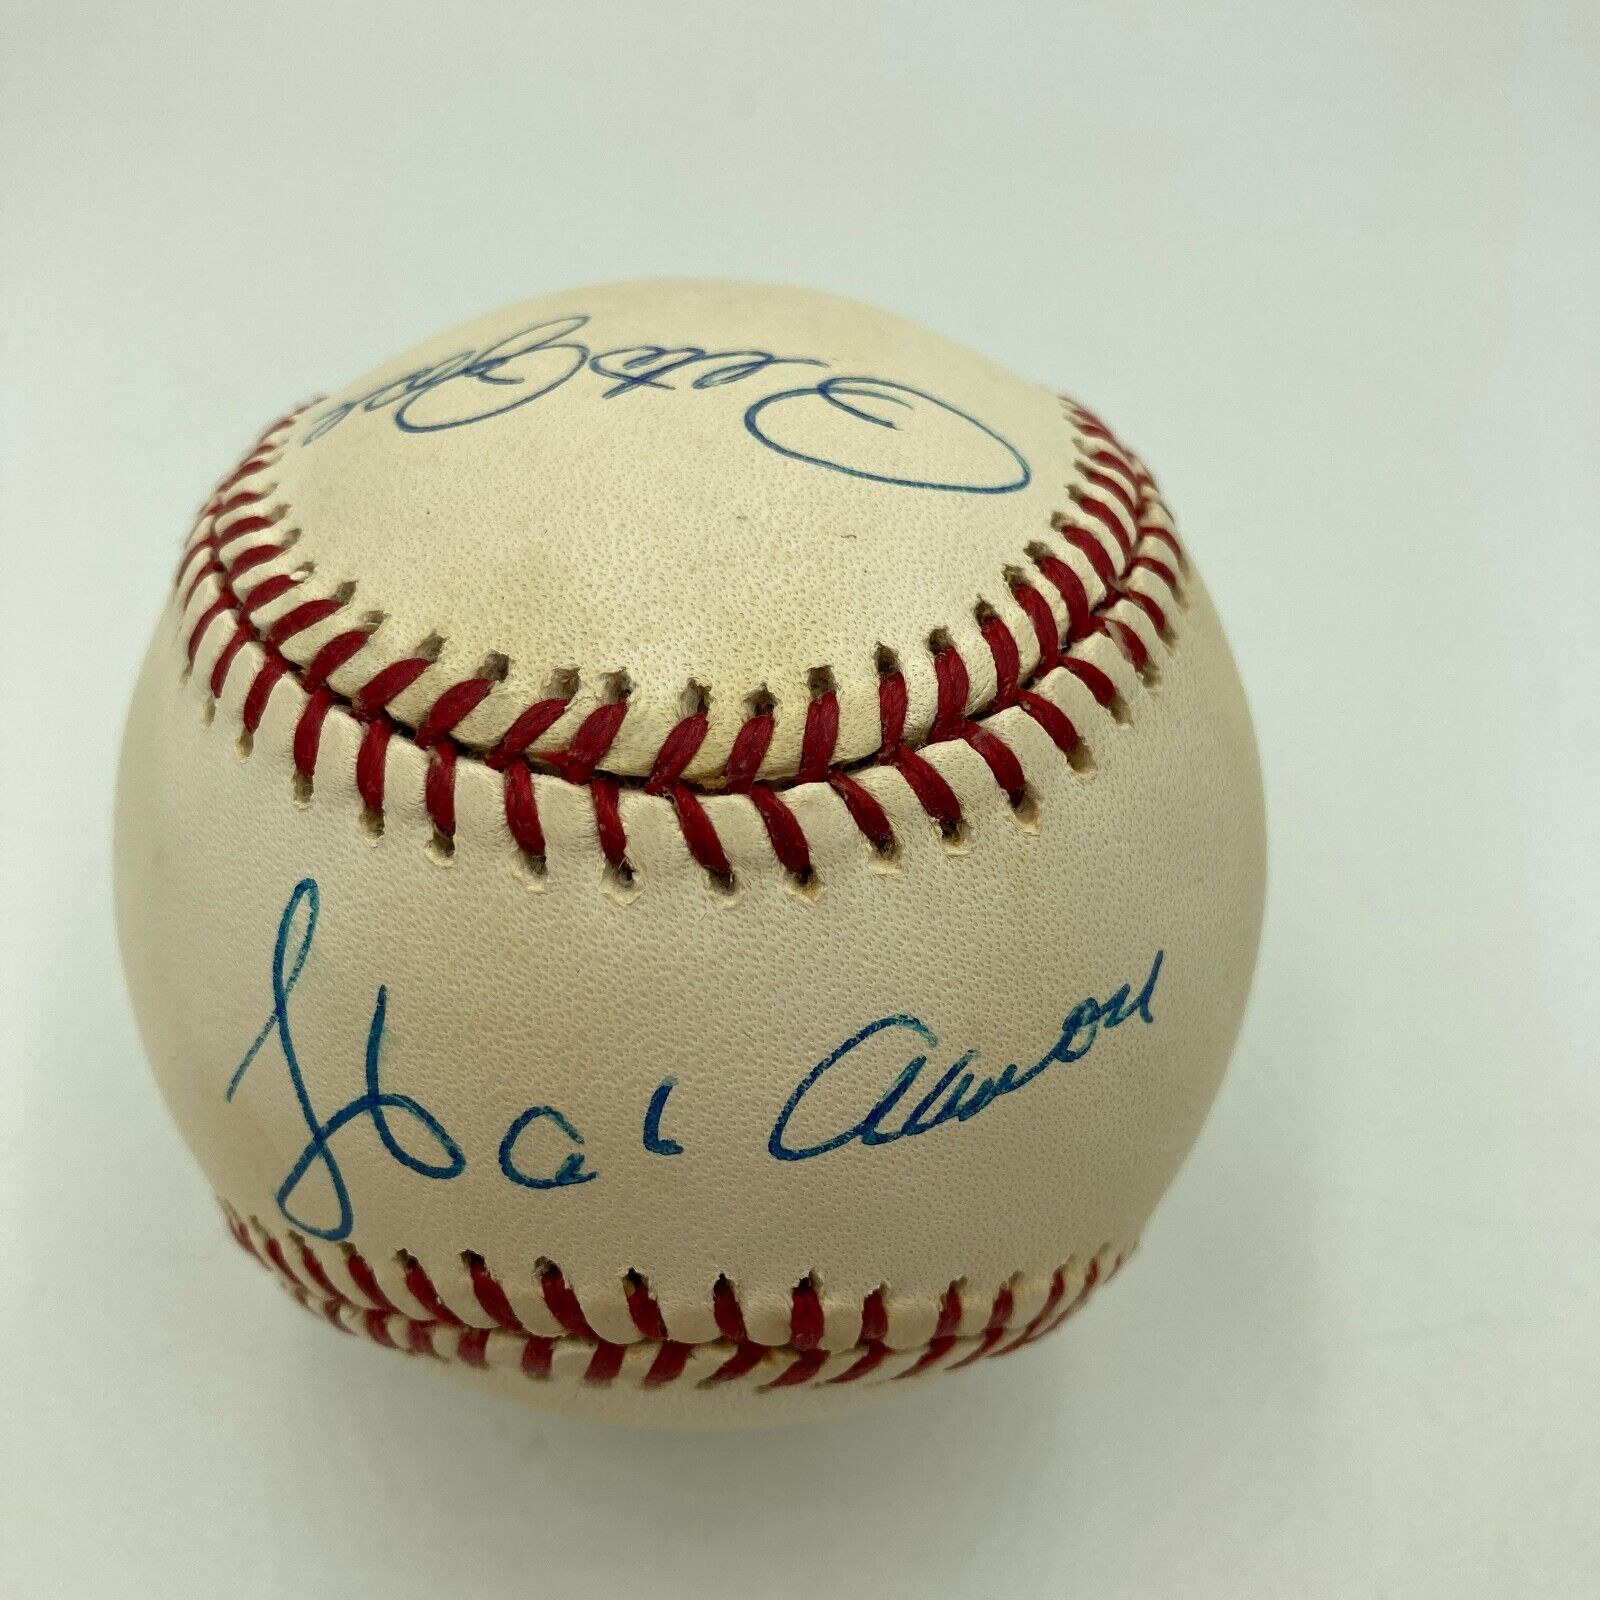 Hank Aaron - Autographed Signed Baseball With Co-Signers